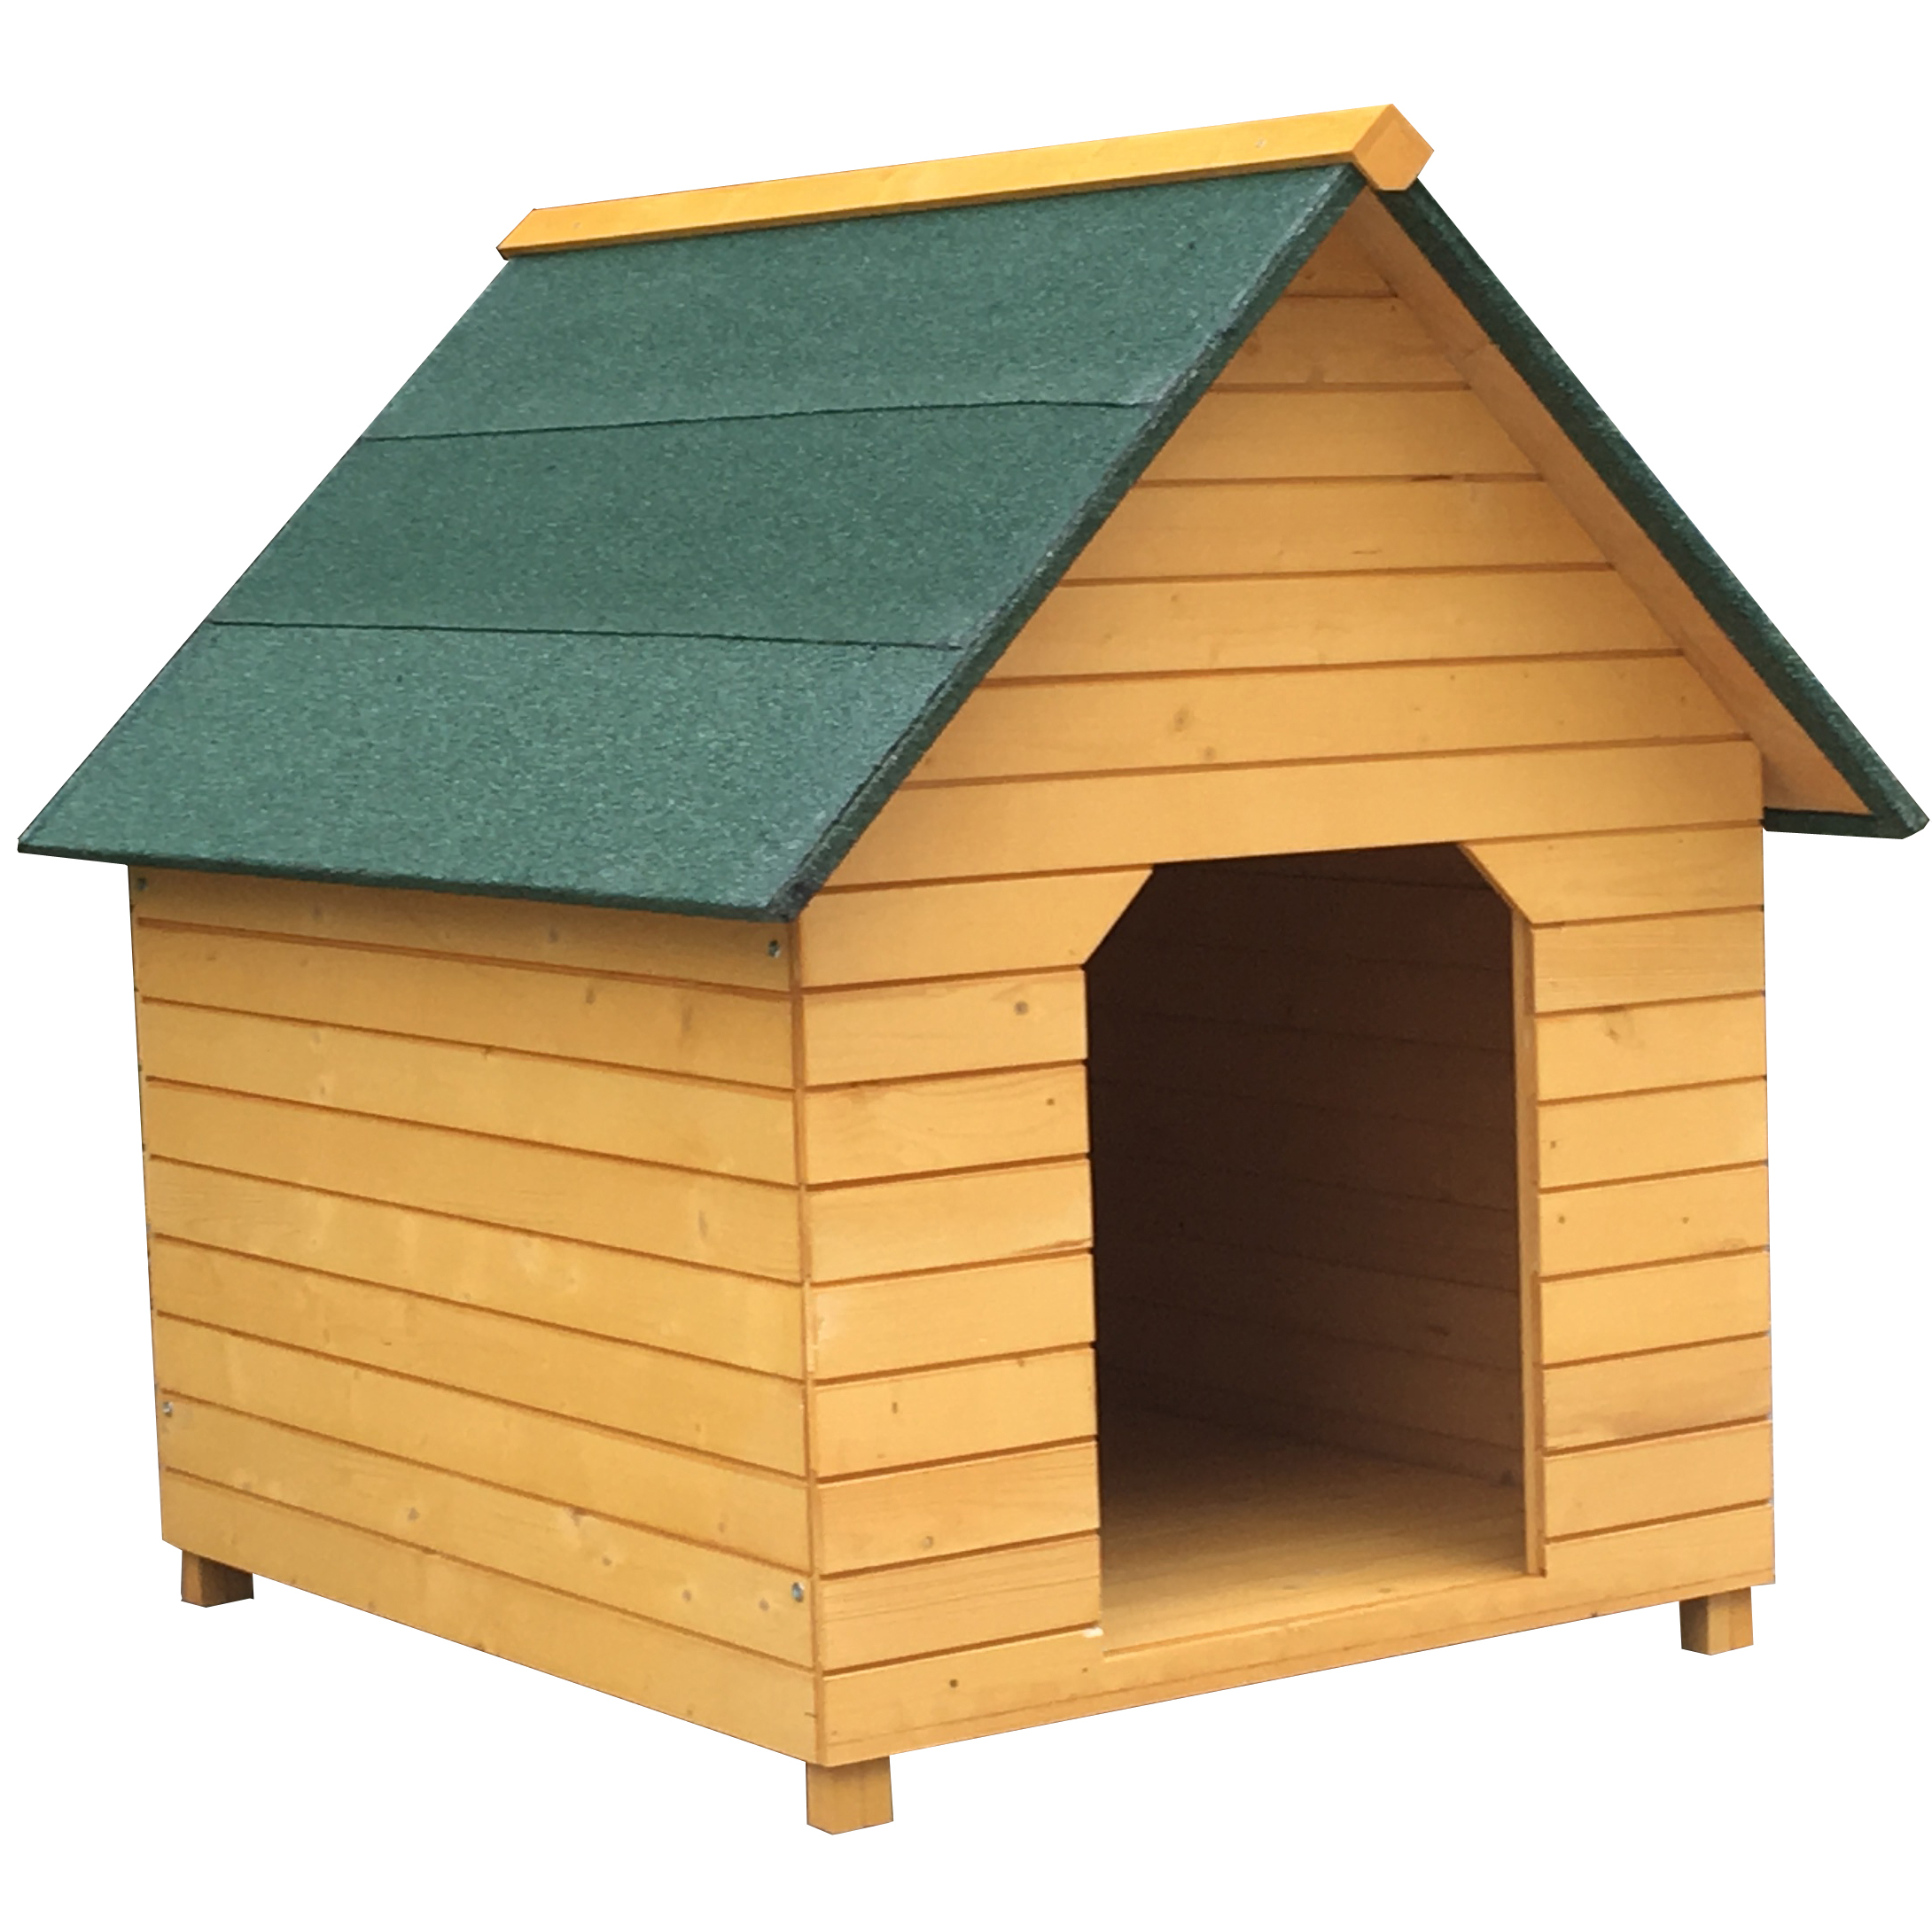 strong fir wood Plu A-frame Lean-to Roof Wooden Dog Kennel house